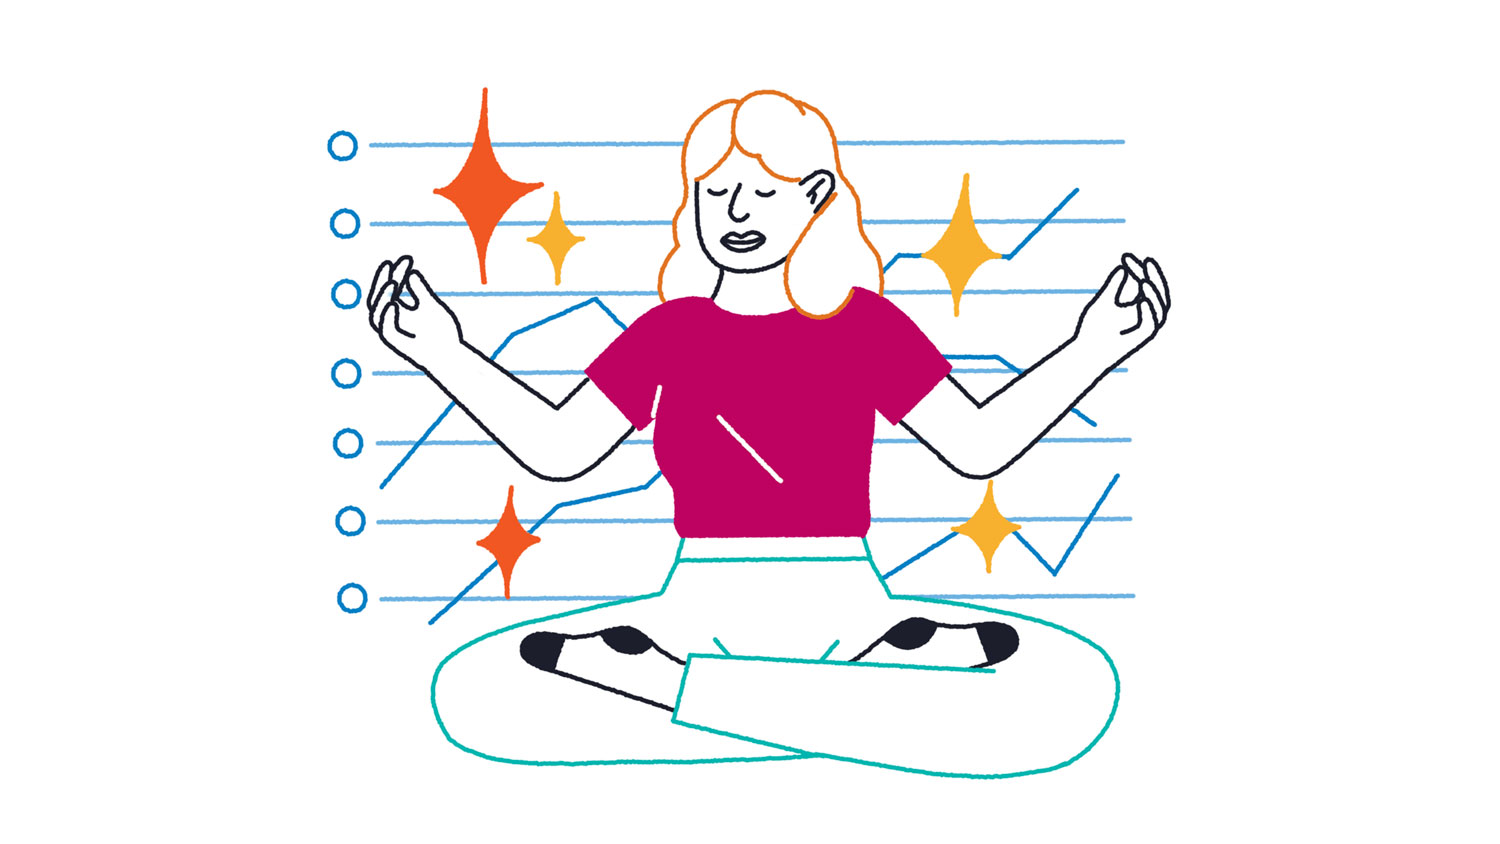 illustration of person sitting in a lotus position in front of a data graph